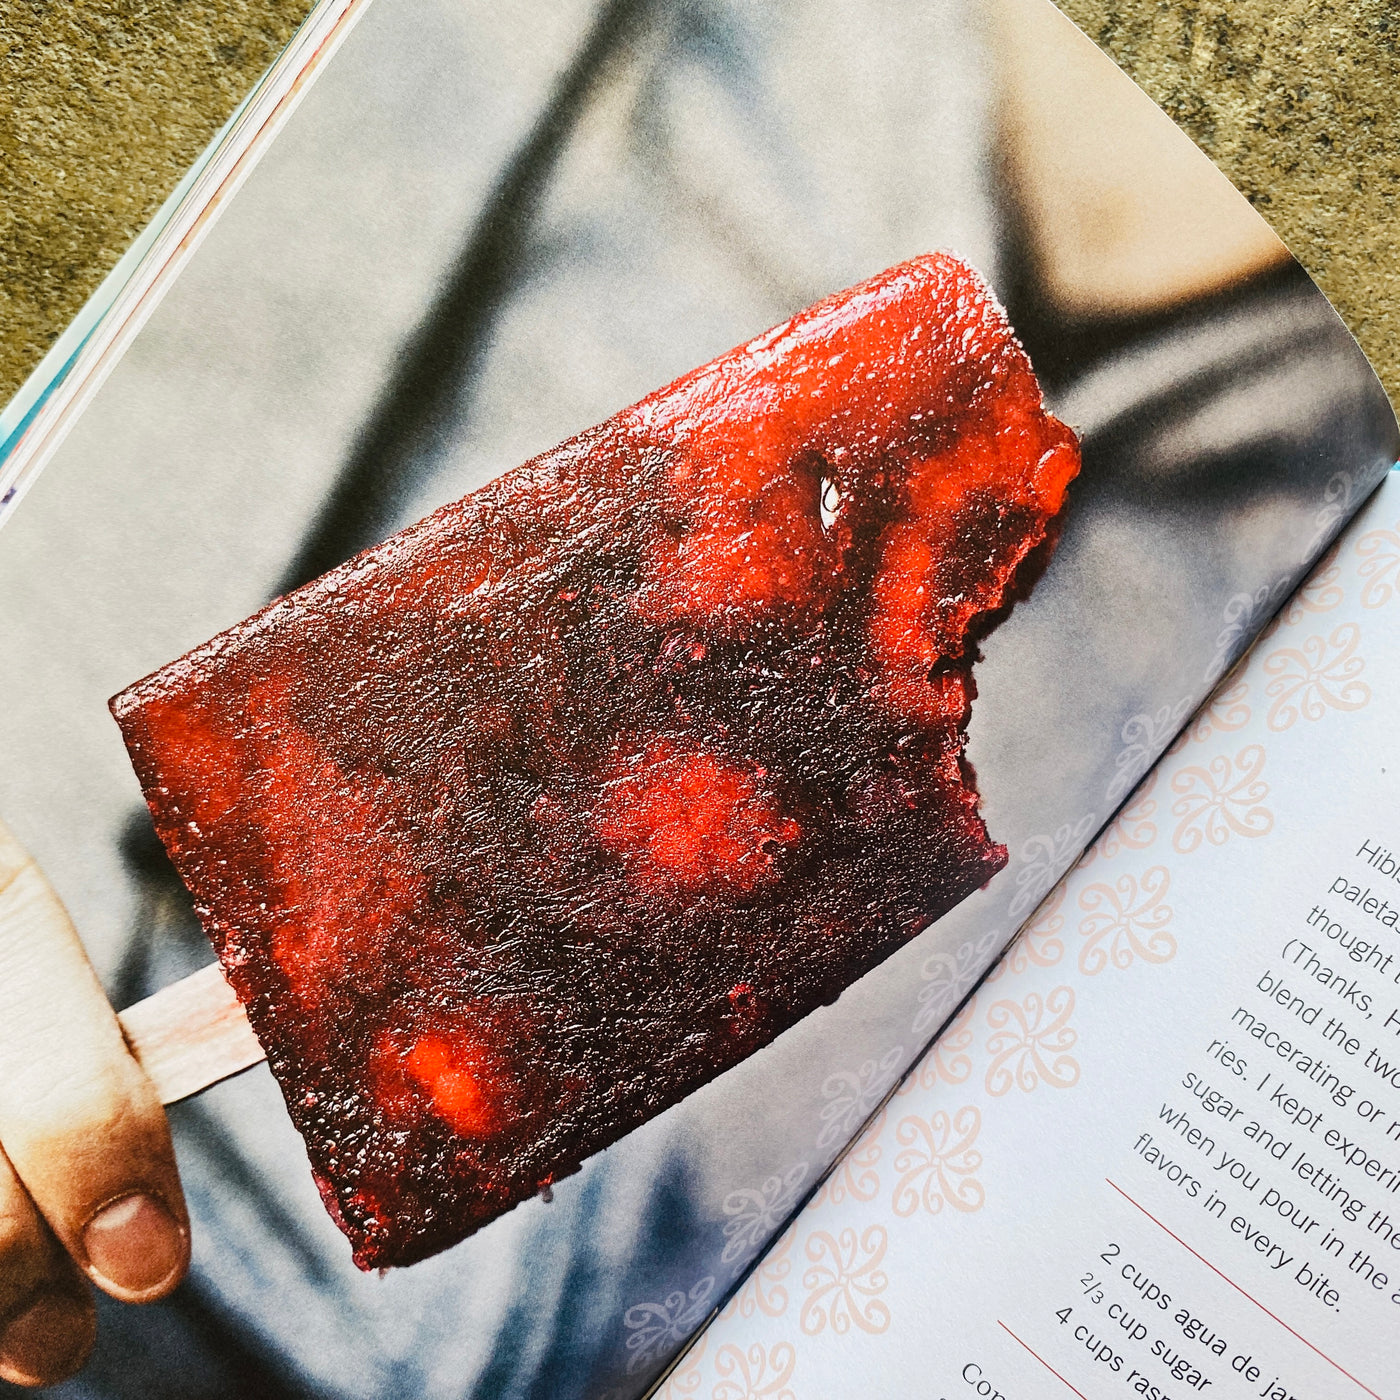 Inside look of Paletas cookbook. Image features deep red paleta with a bite mark.